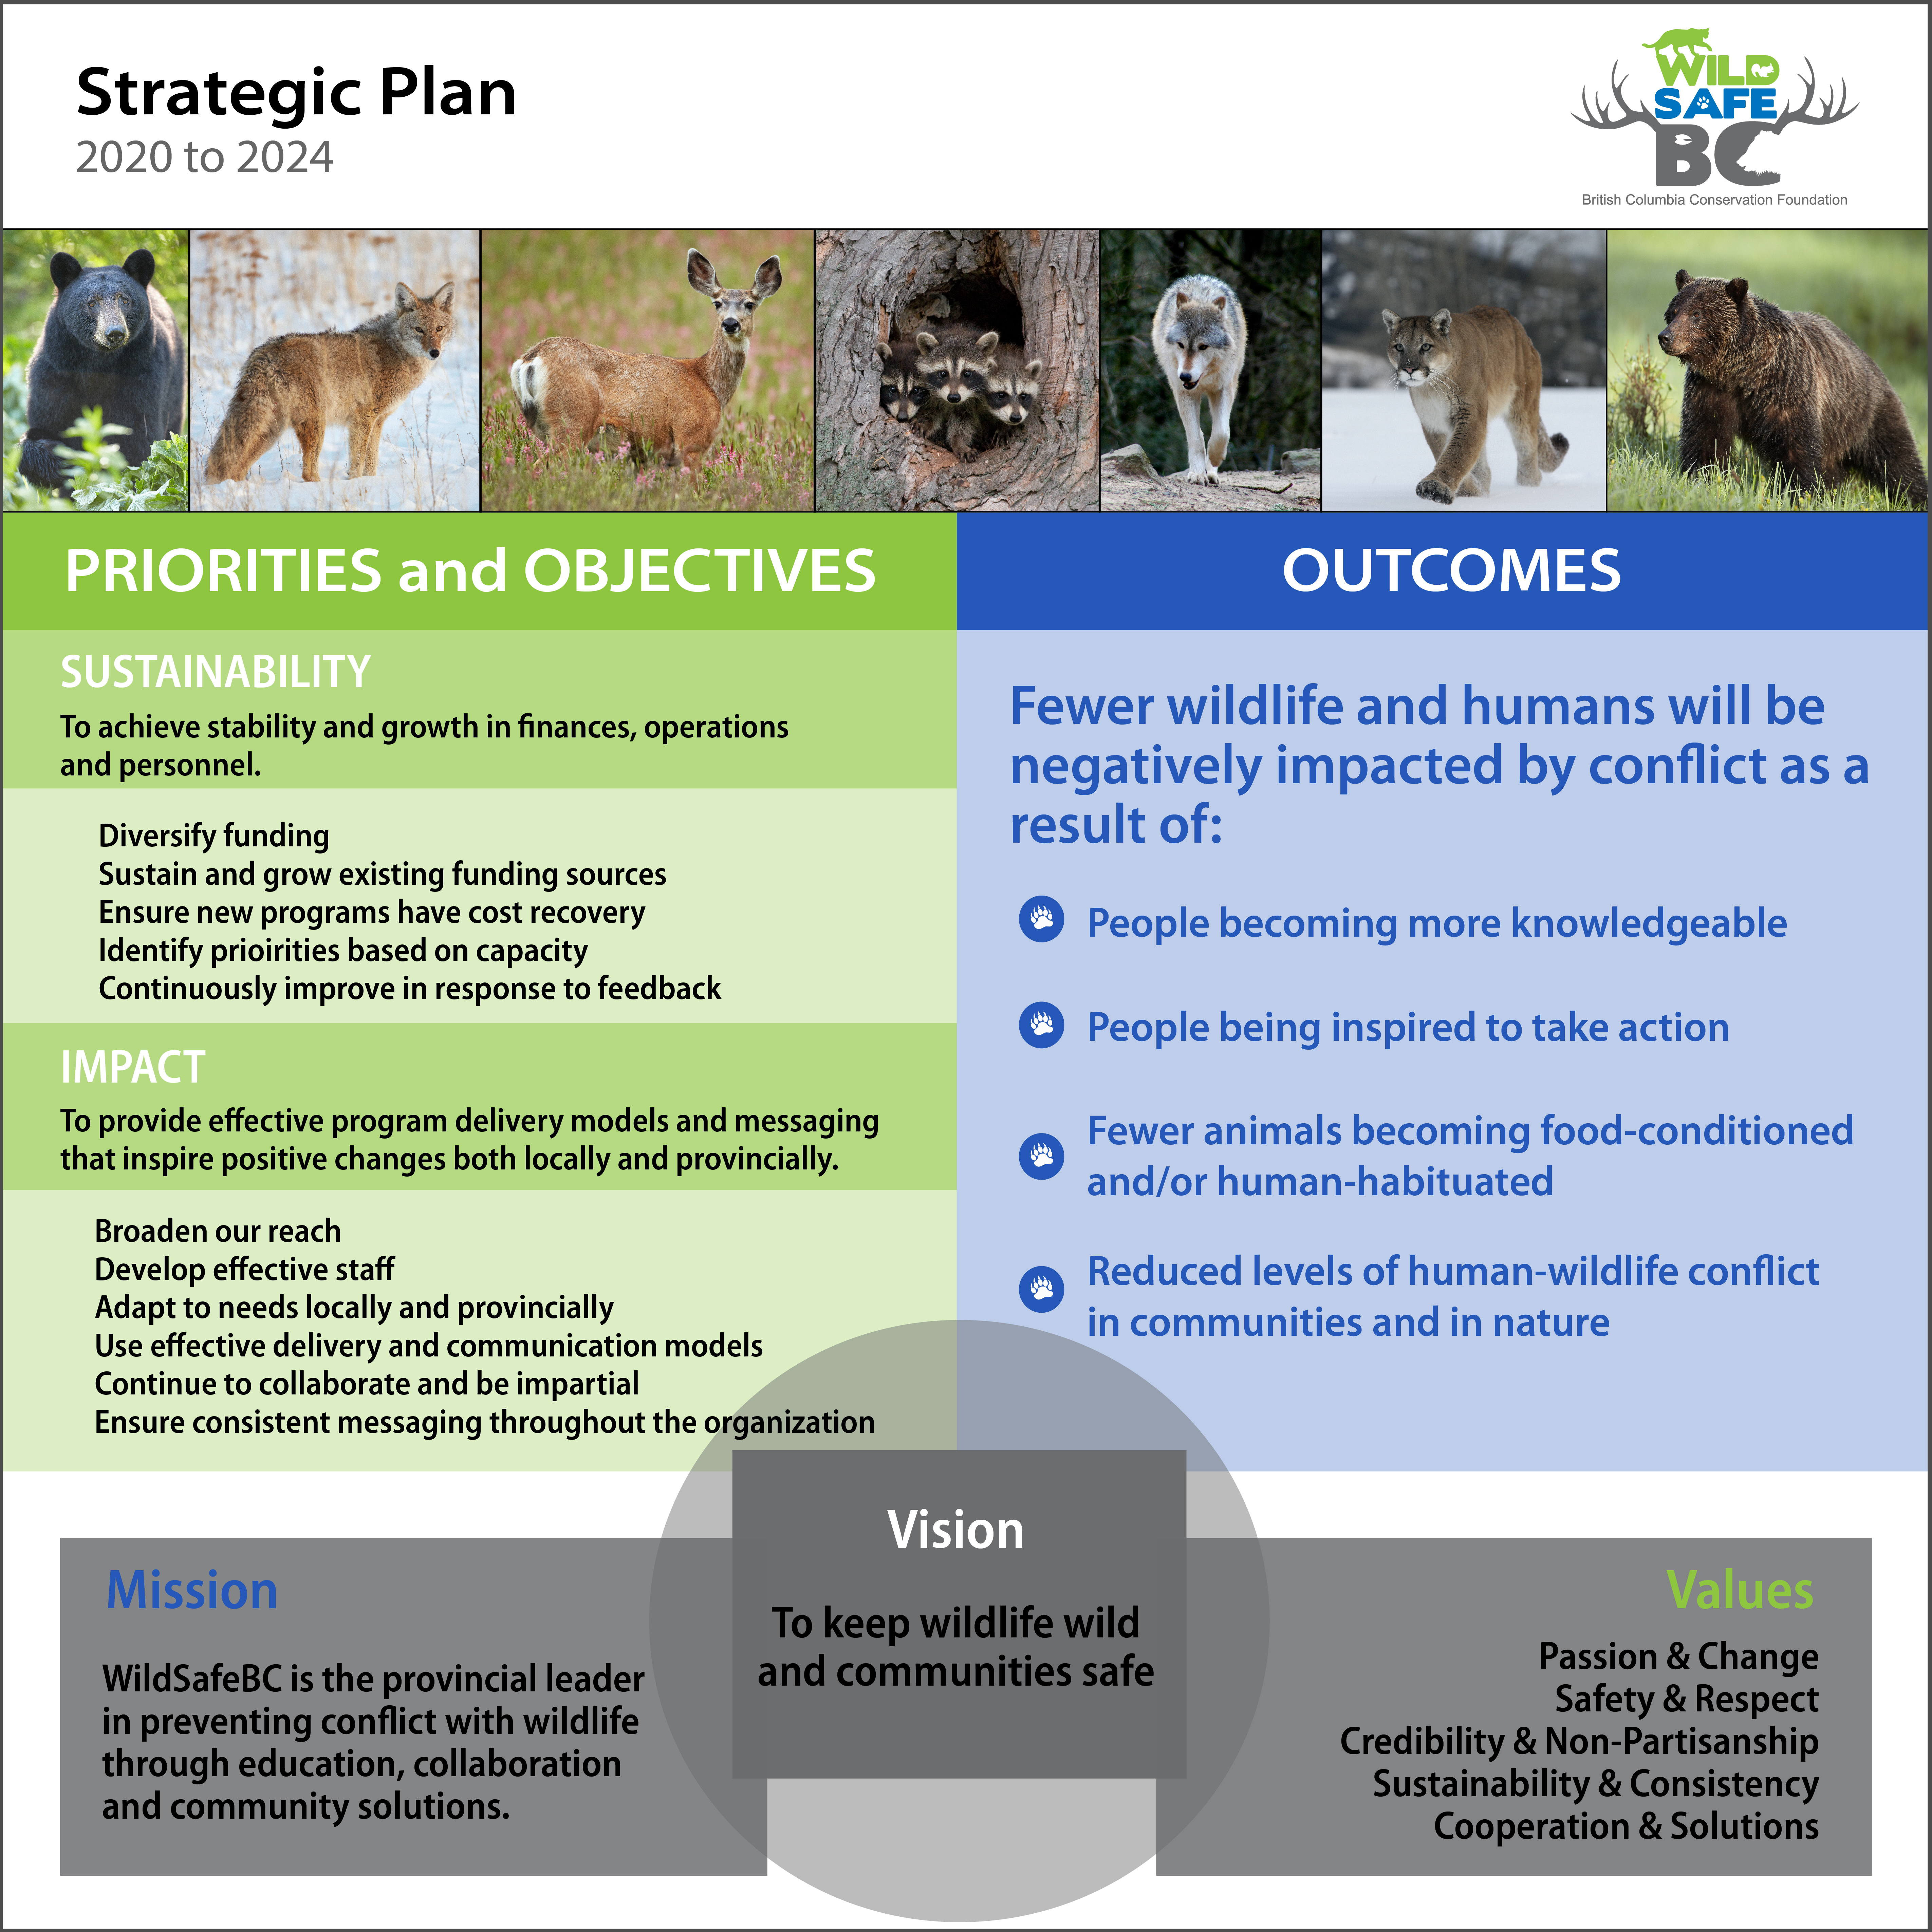 Strategic plan one page 2020 to 2024_with border-01